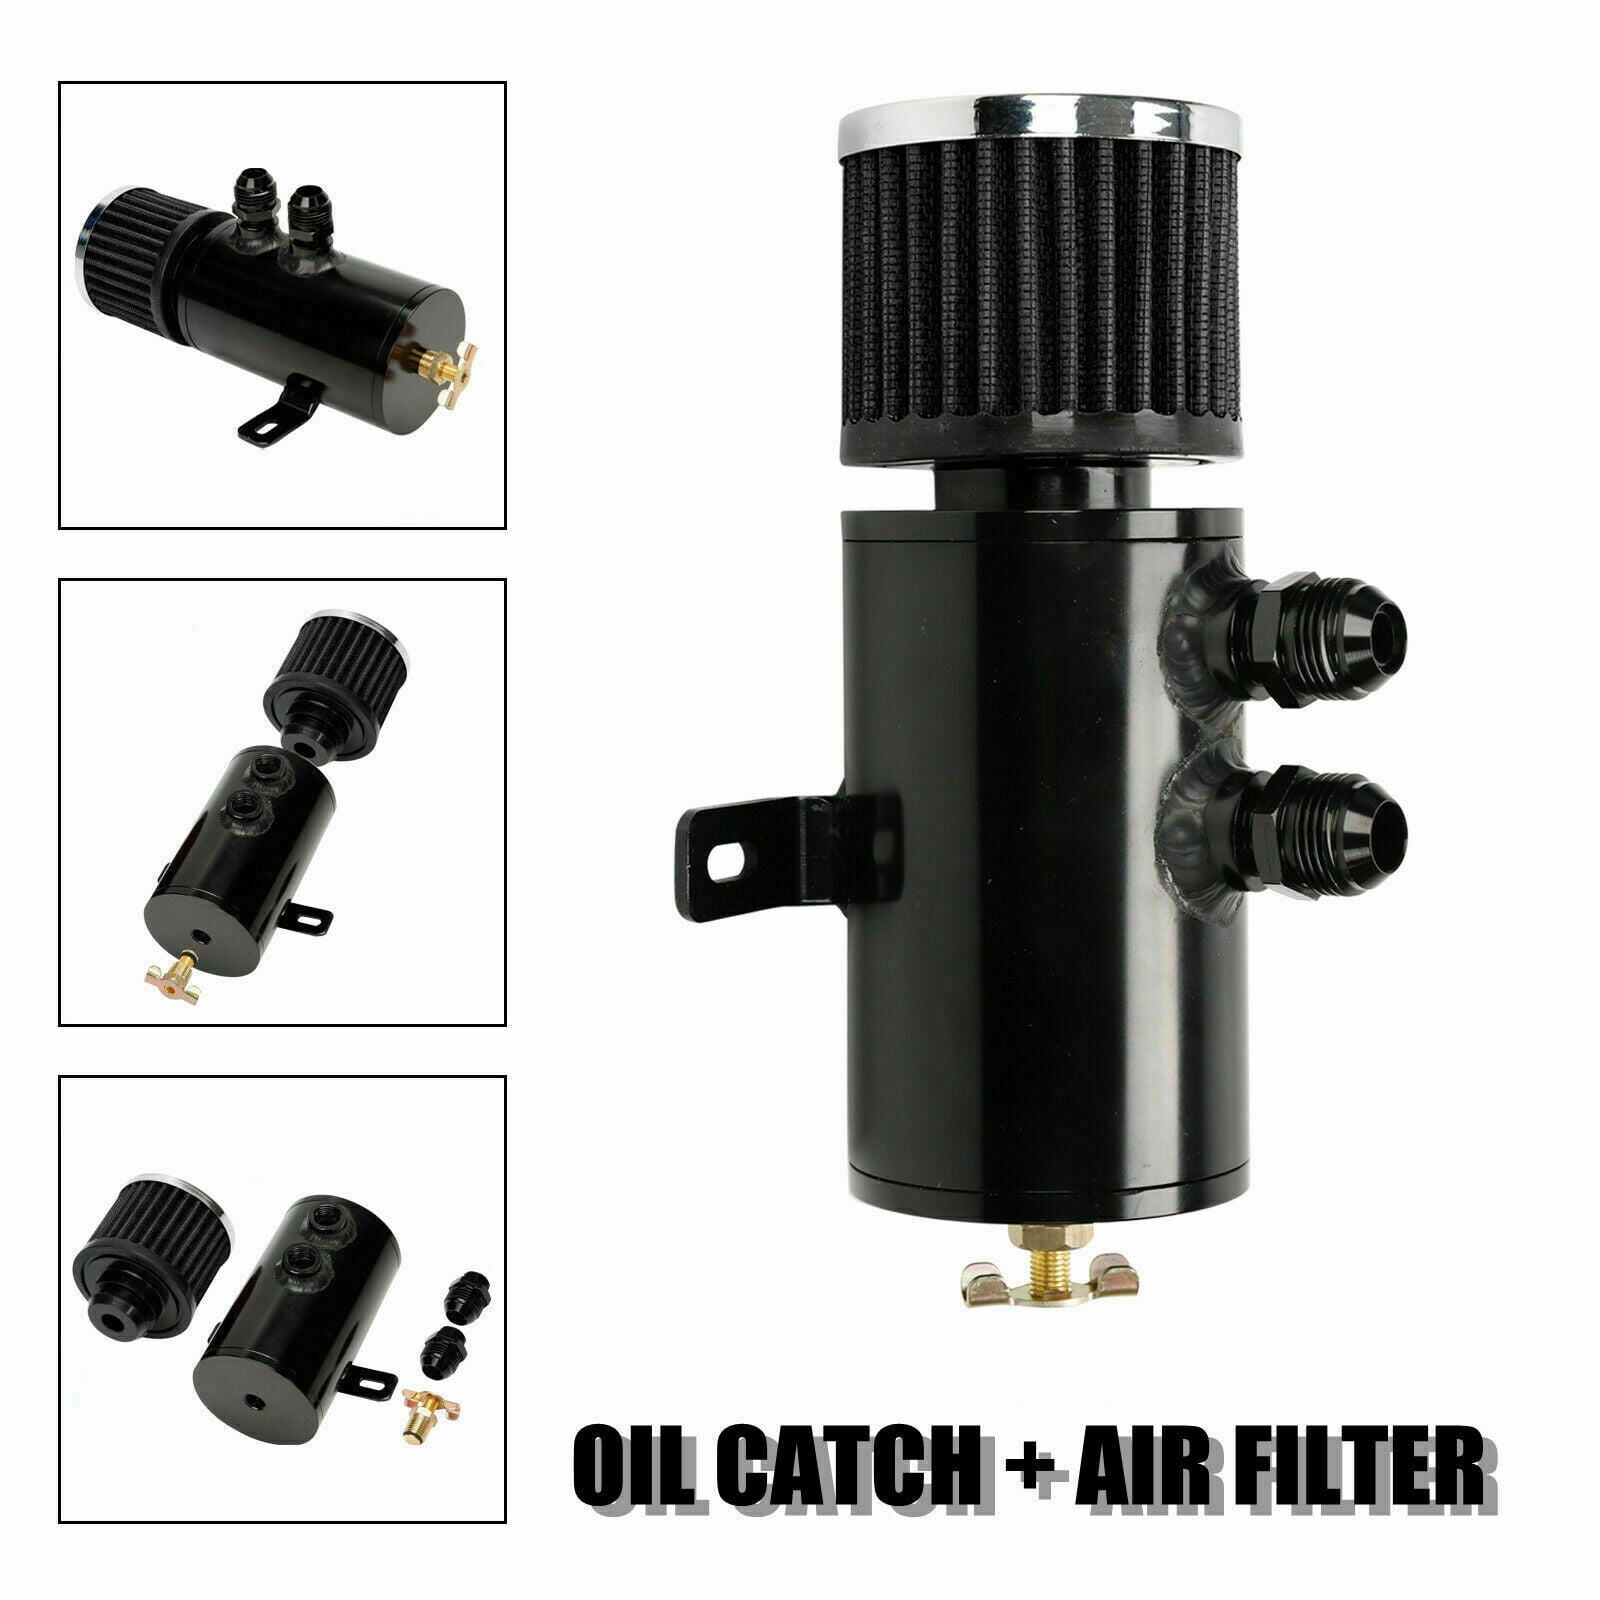 BLACK ALUMINUM OIL CATCH CAN RESERVOIR TANK WITH BREATHER FILTER BAFFLED OSIAS